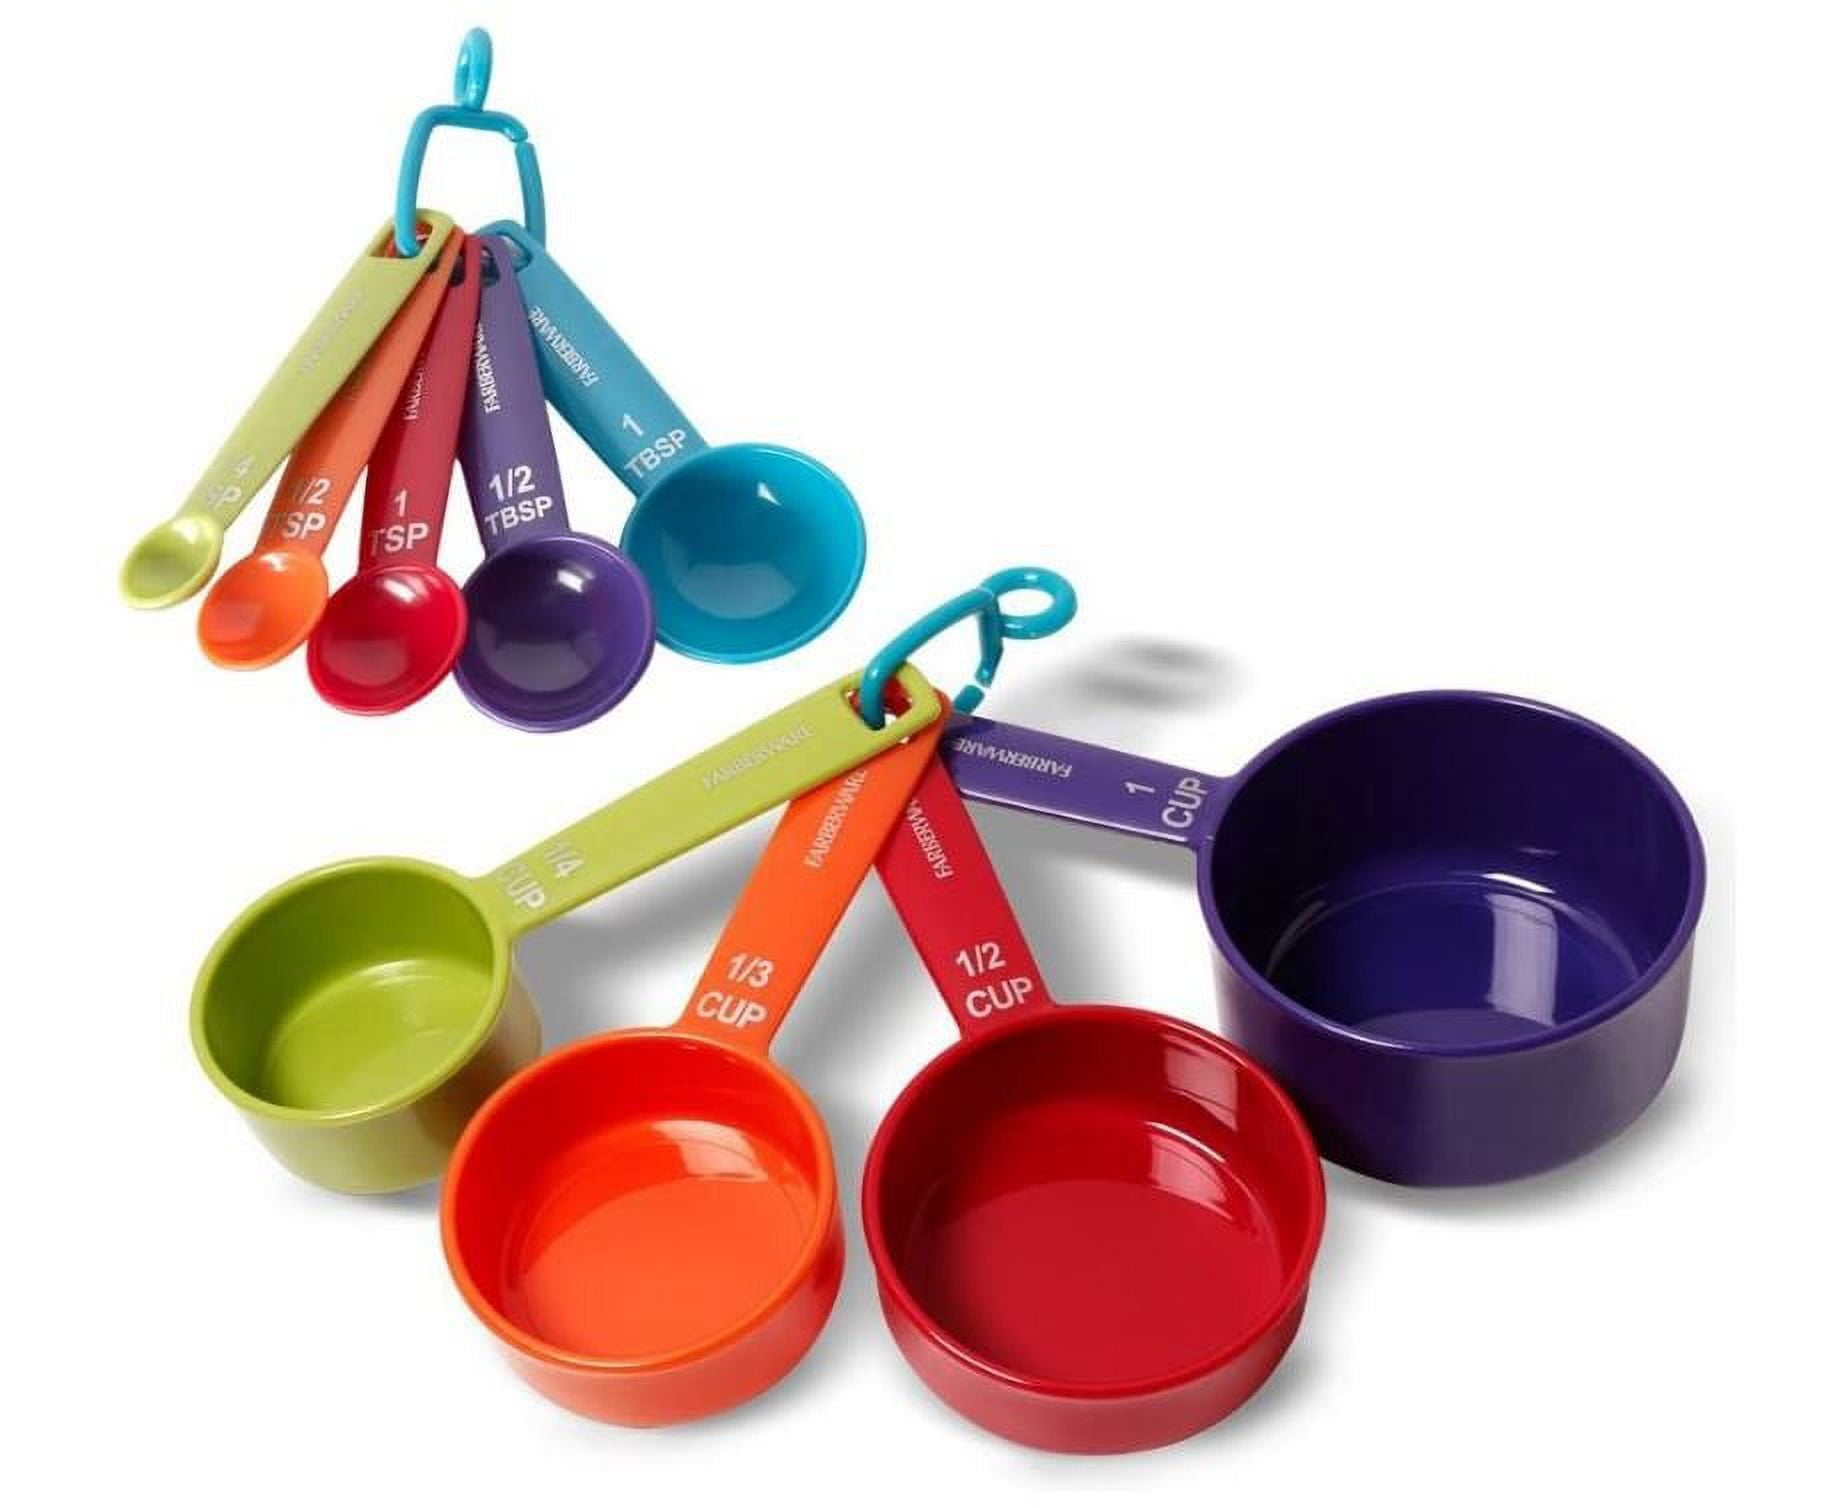 French KOKO 9-Piece Gold Measuring Cups and Spoons Set - Magnetic